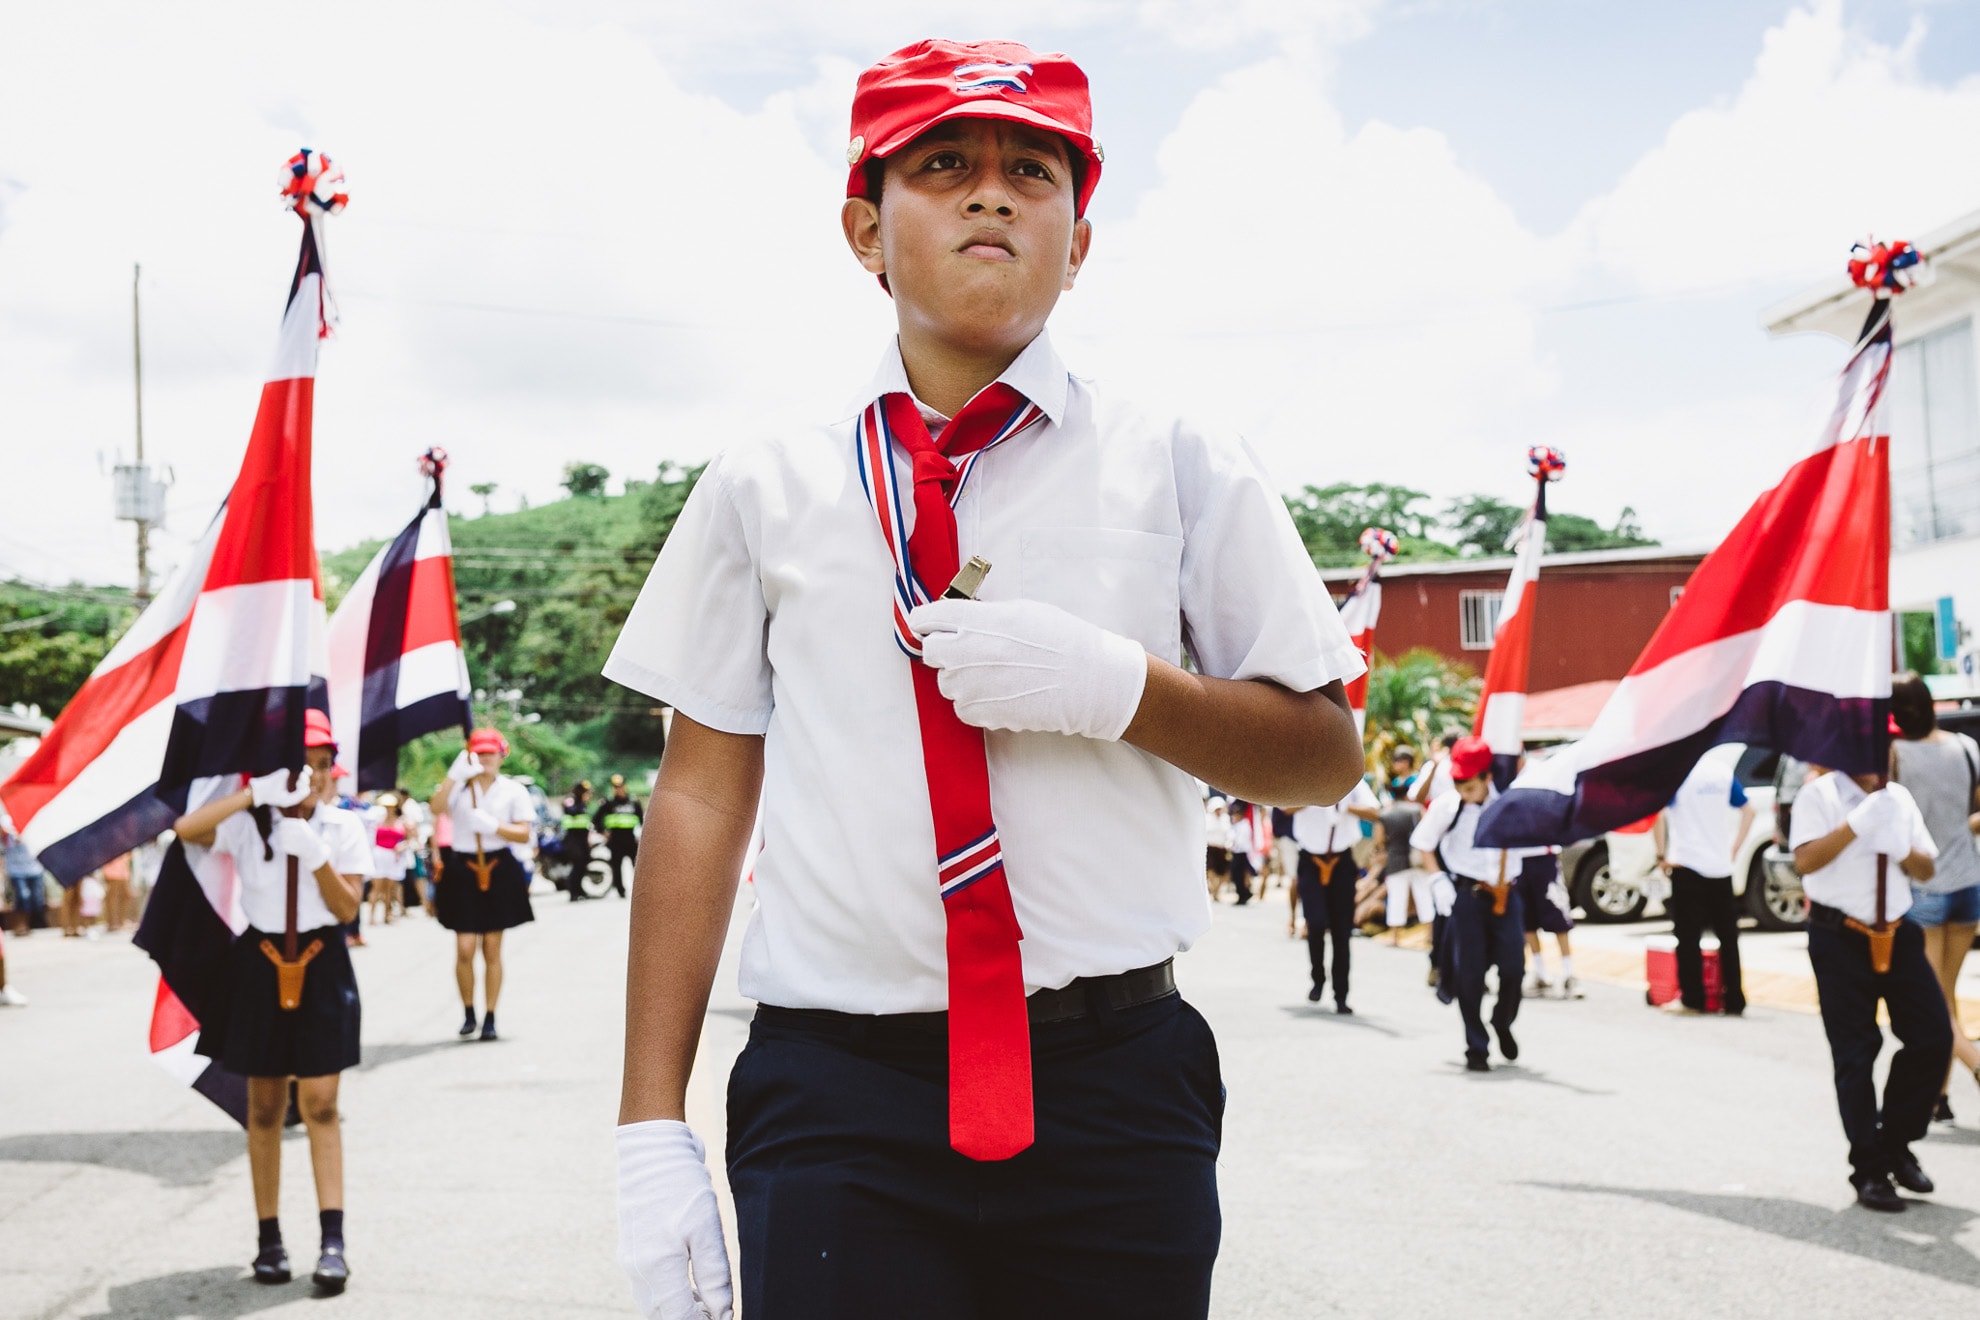 Independence Celebrations in Costa Rica